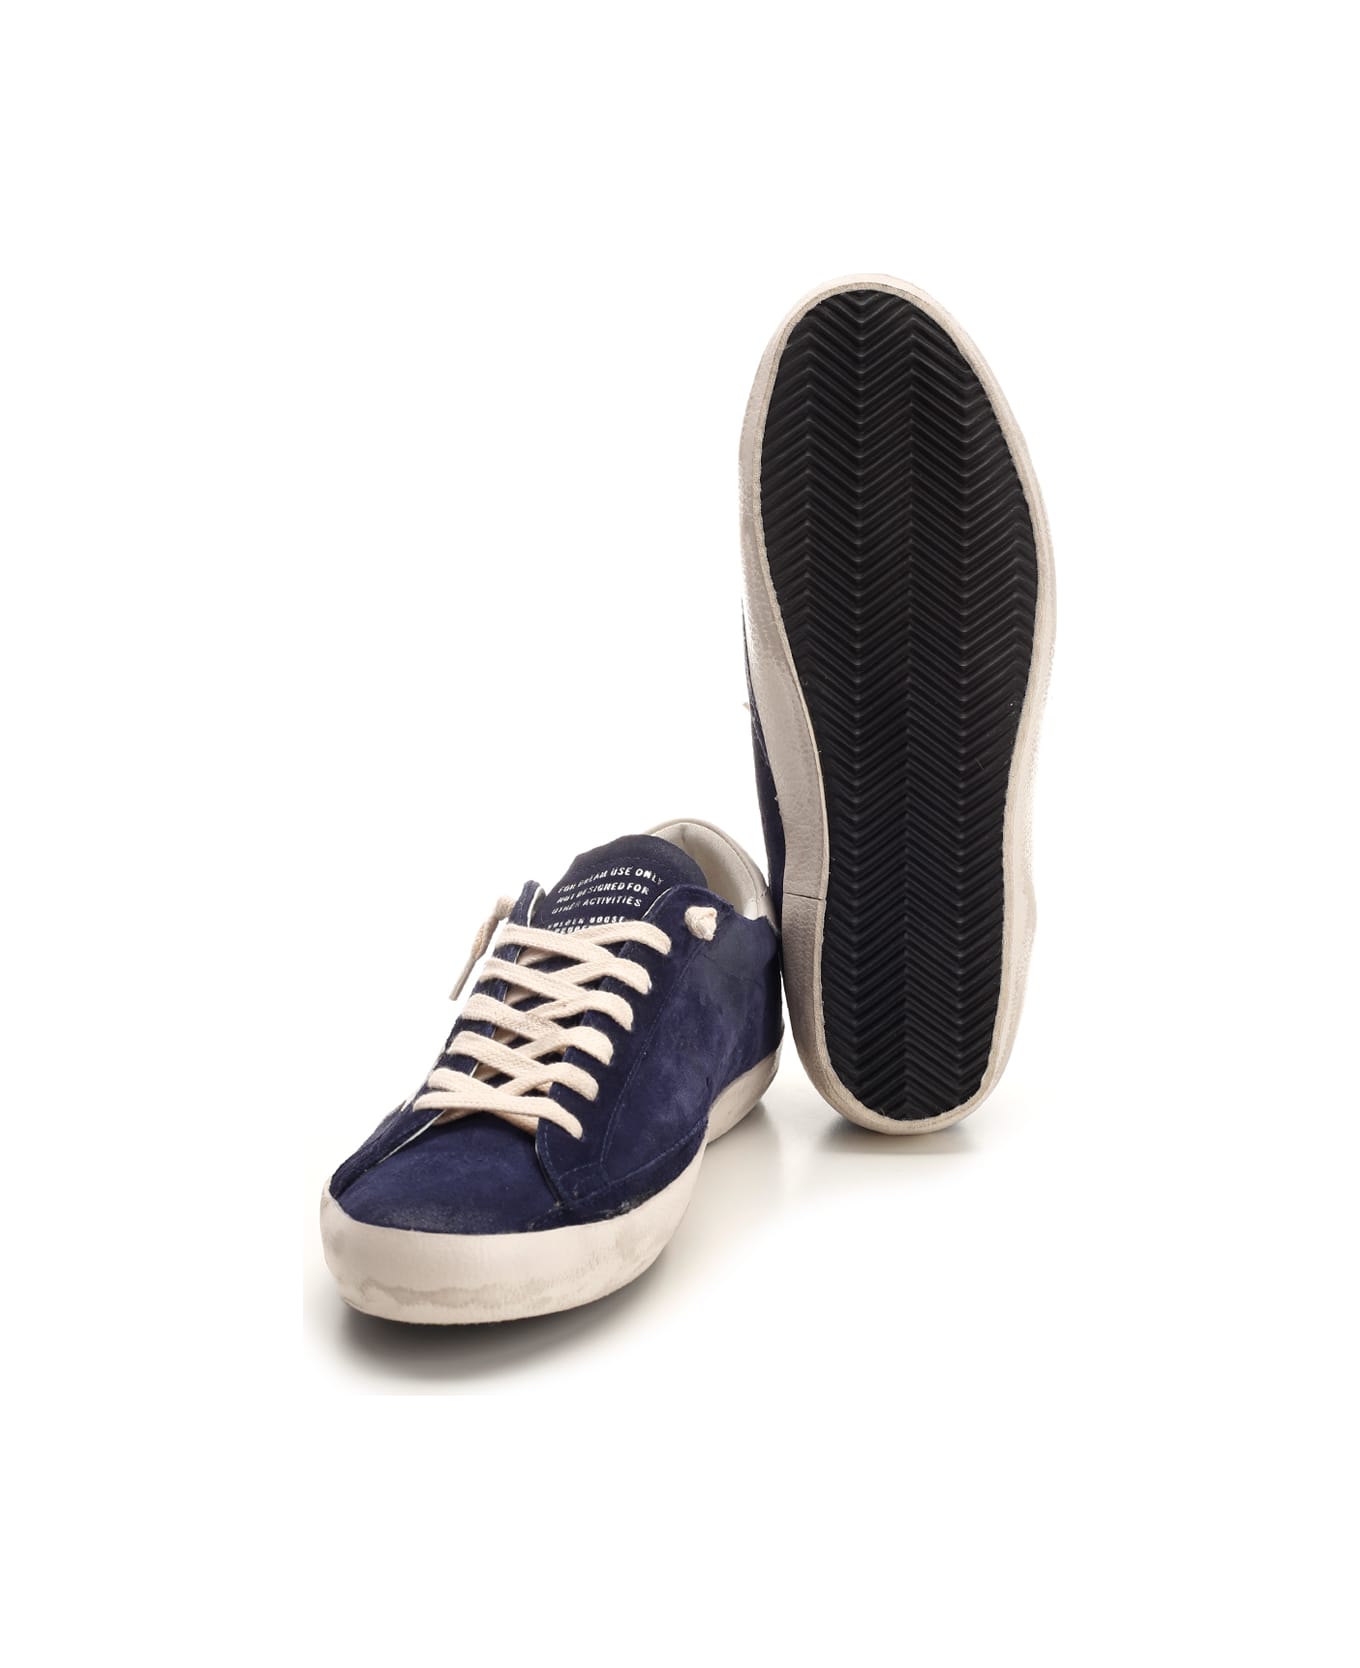 Golden Goose Super-star Classic Sneakers - BLUE/WHITE